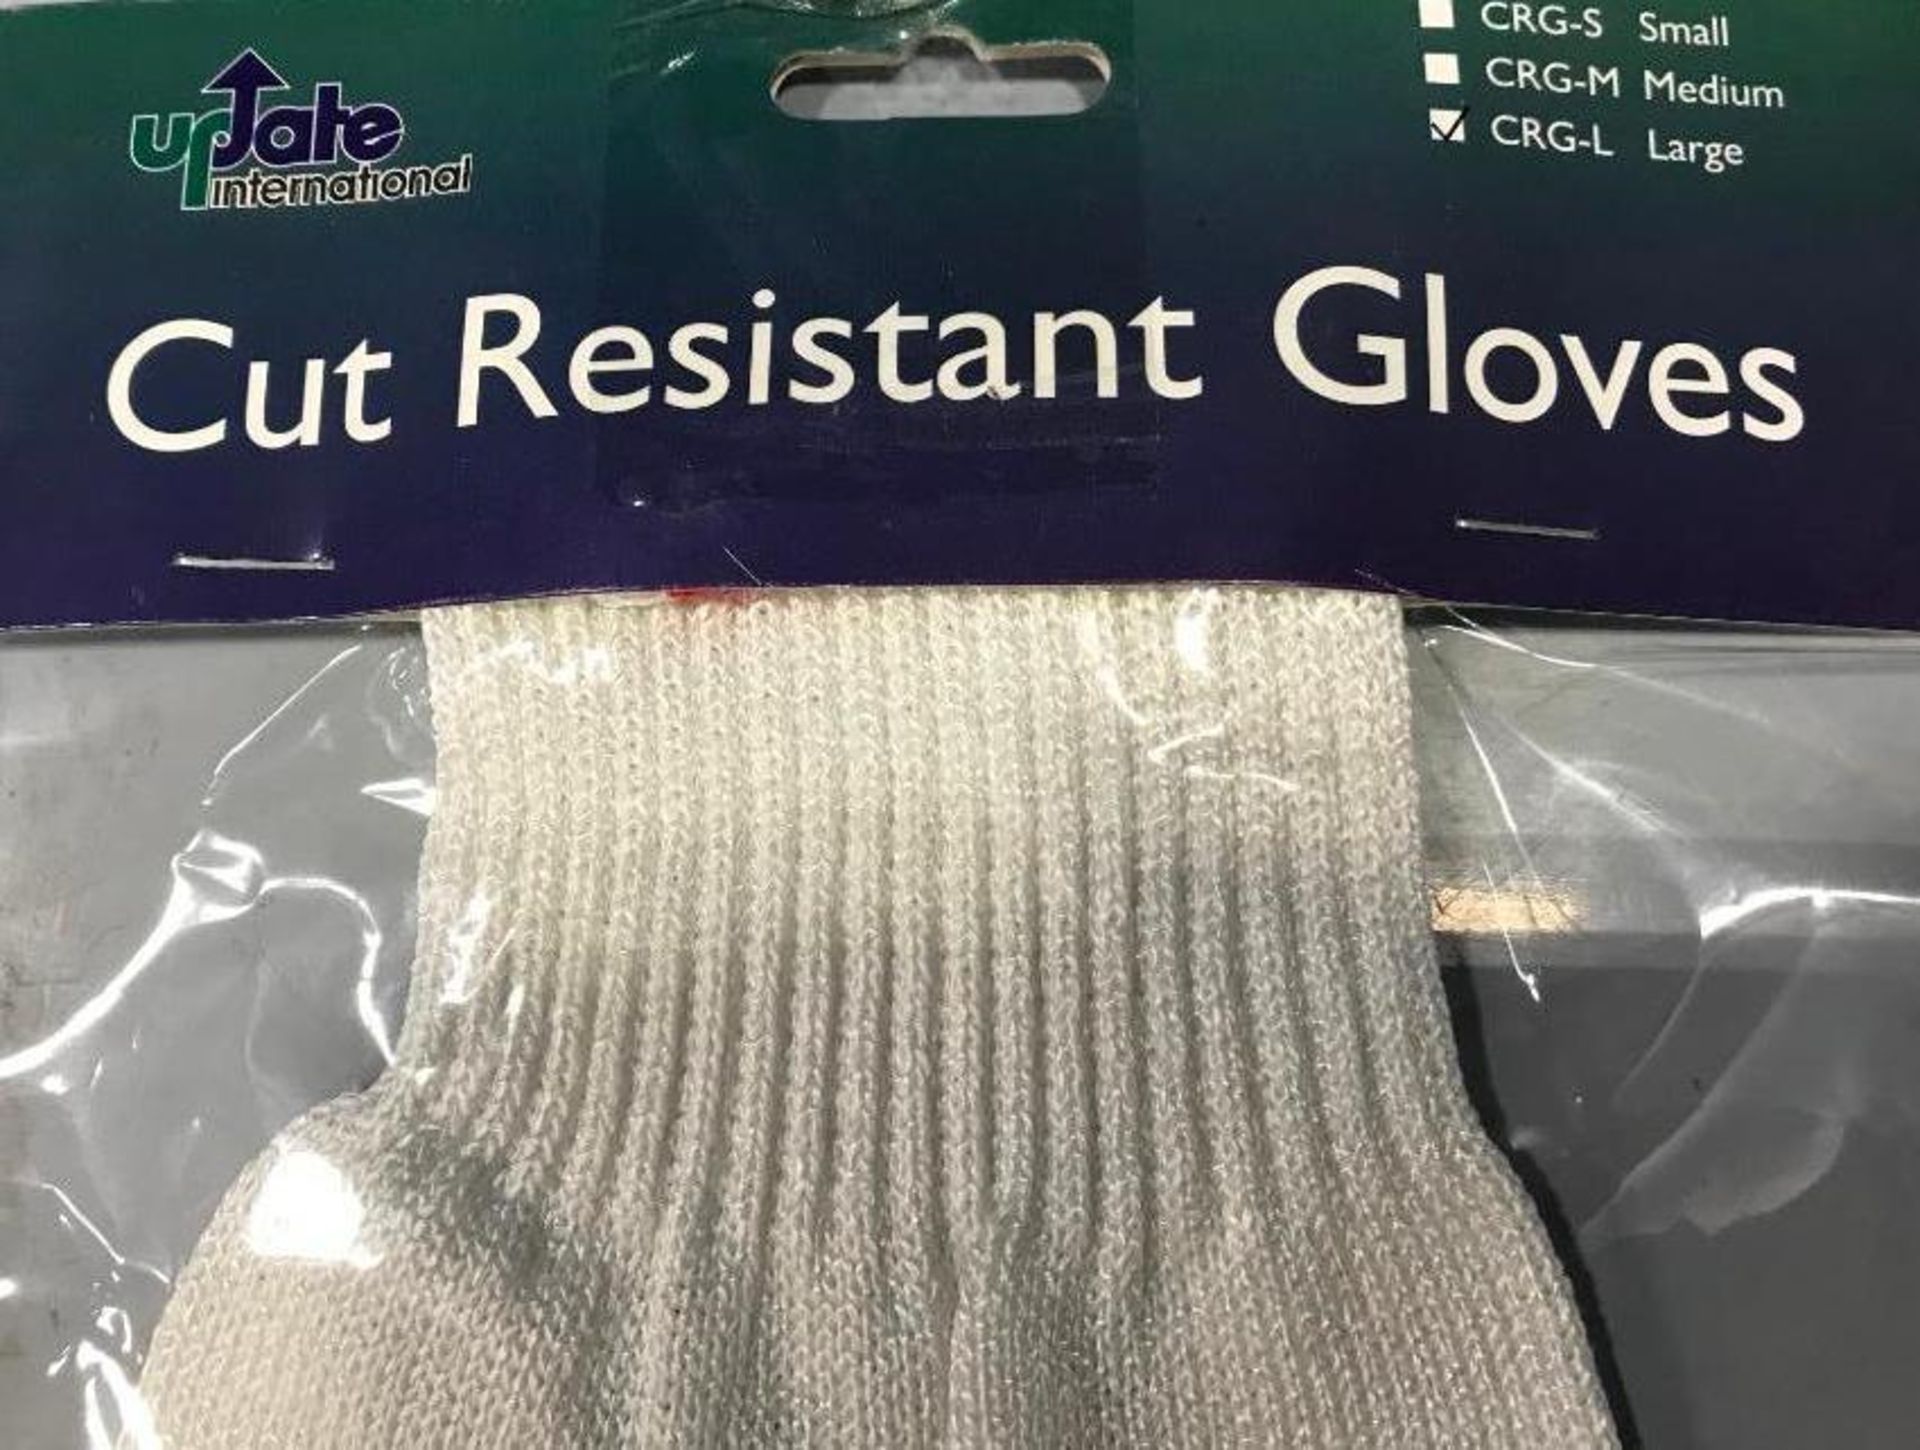 LARGE (10.25") CUT-RESISTANT GLOVE, UPDATE CRG-L - NEW - Image 2 of 3